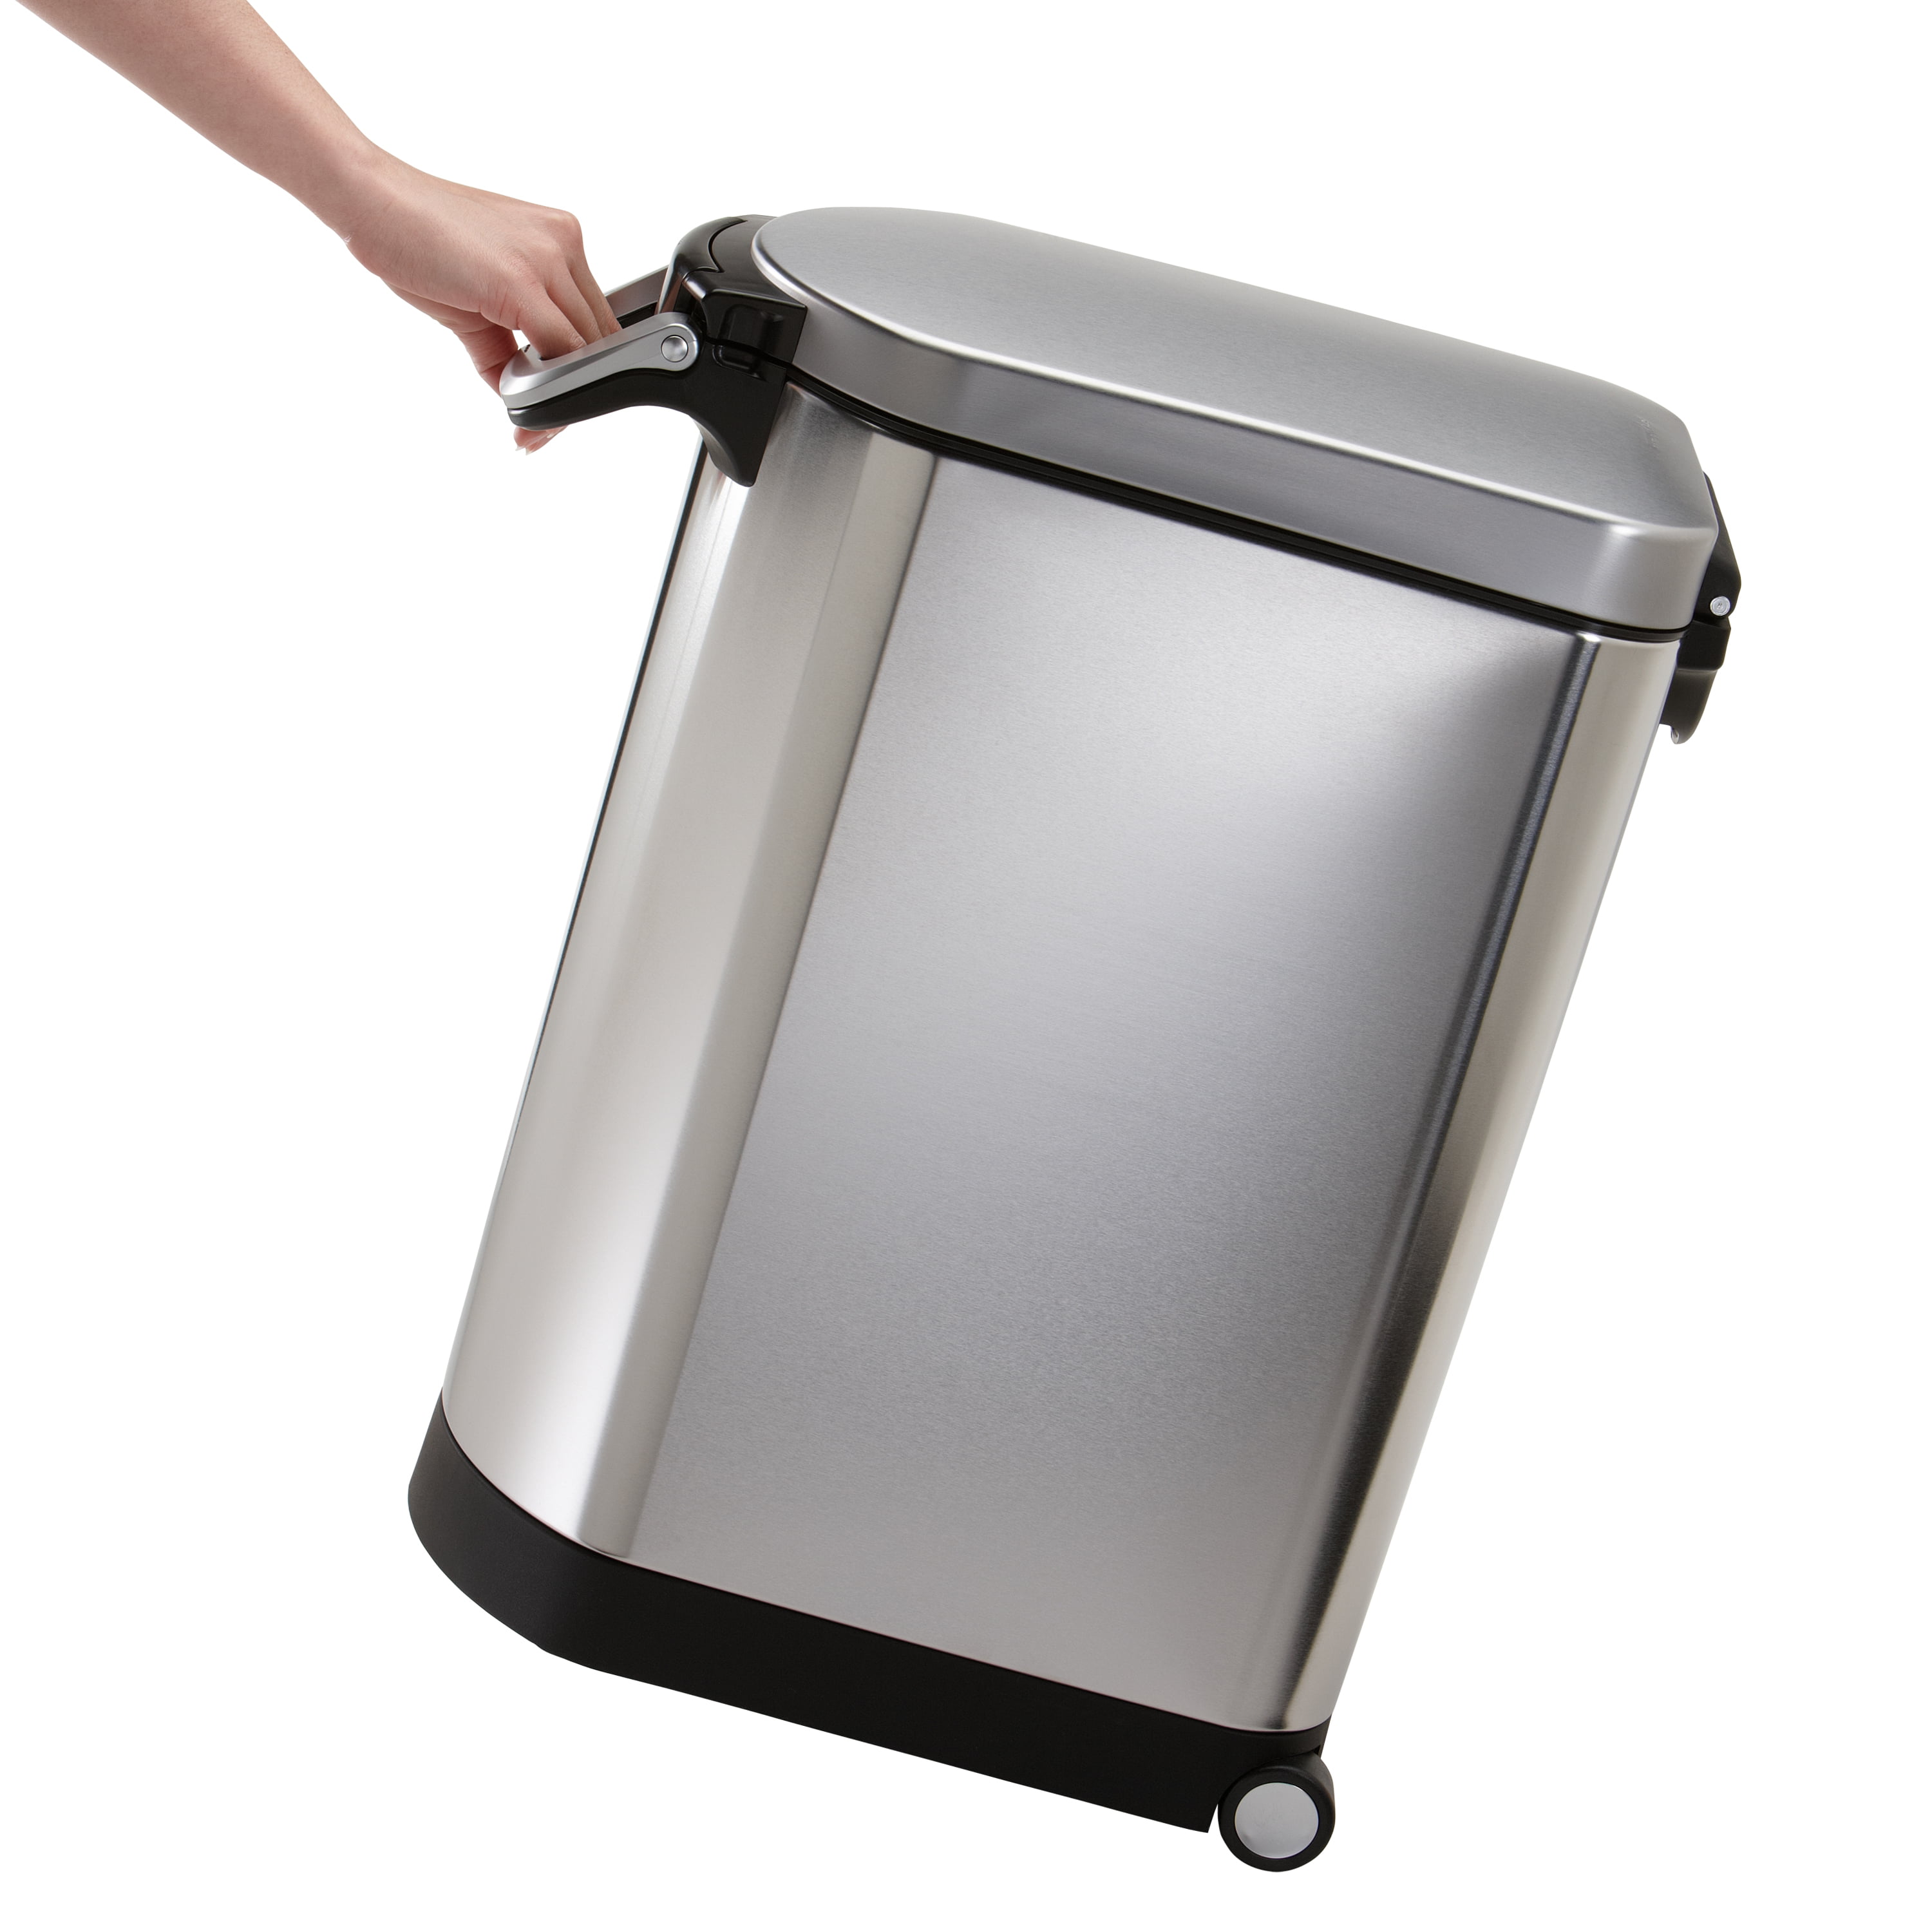 STORAGE CONTAINER 120 LITRE PLASTIC DRUM WITH LID AND CLAMP FROM RAINBOW CHALK 